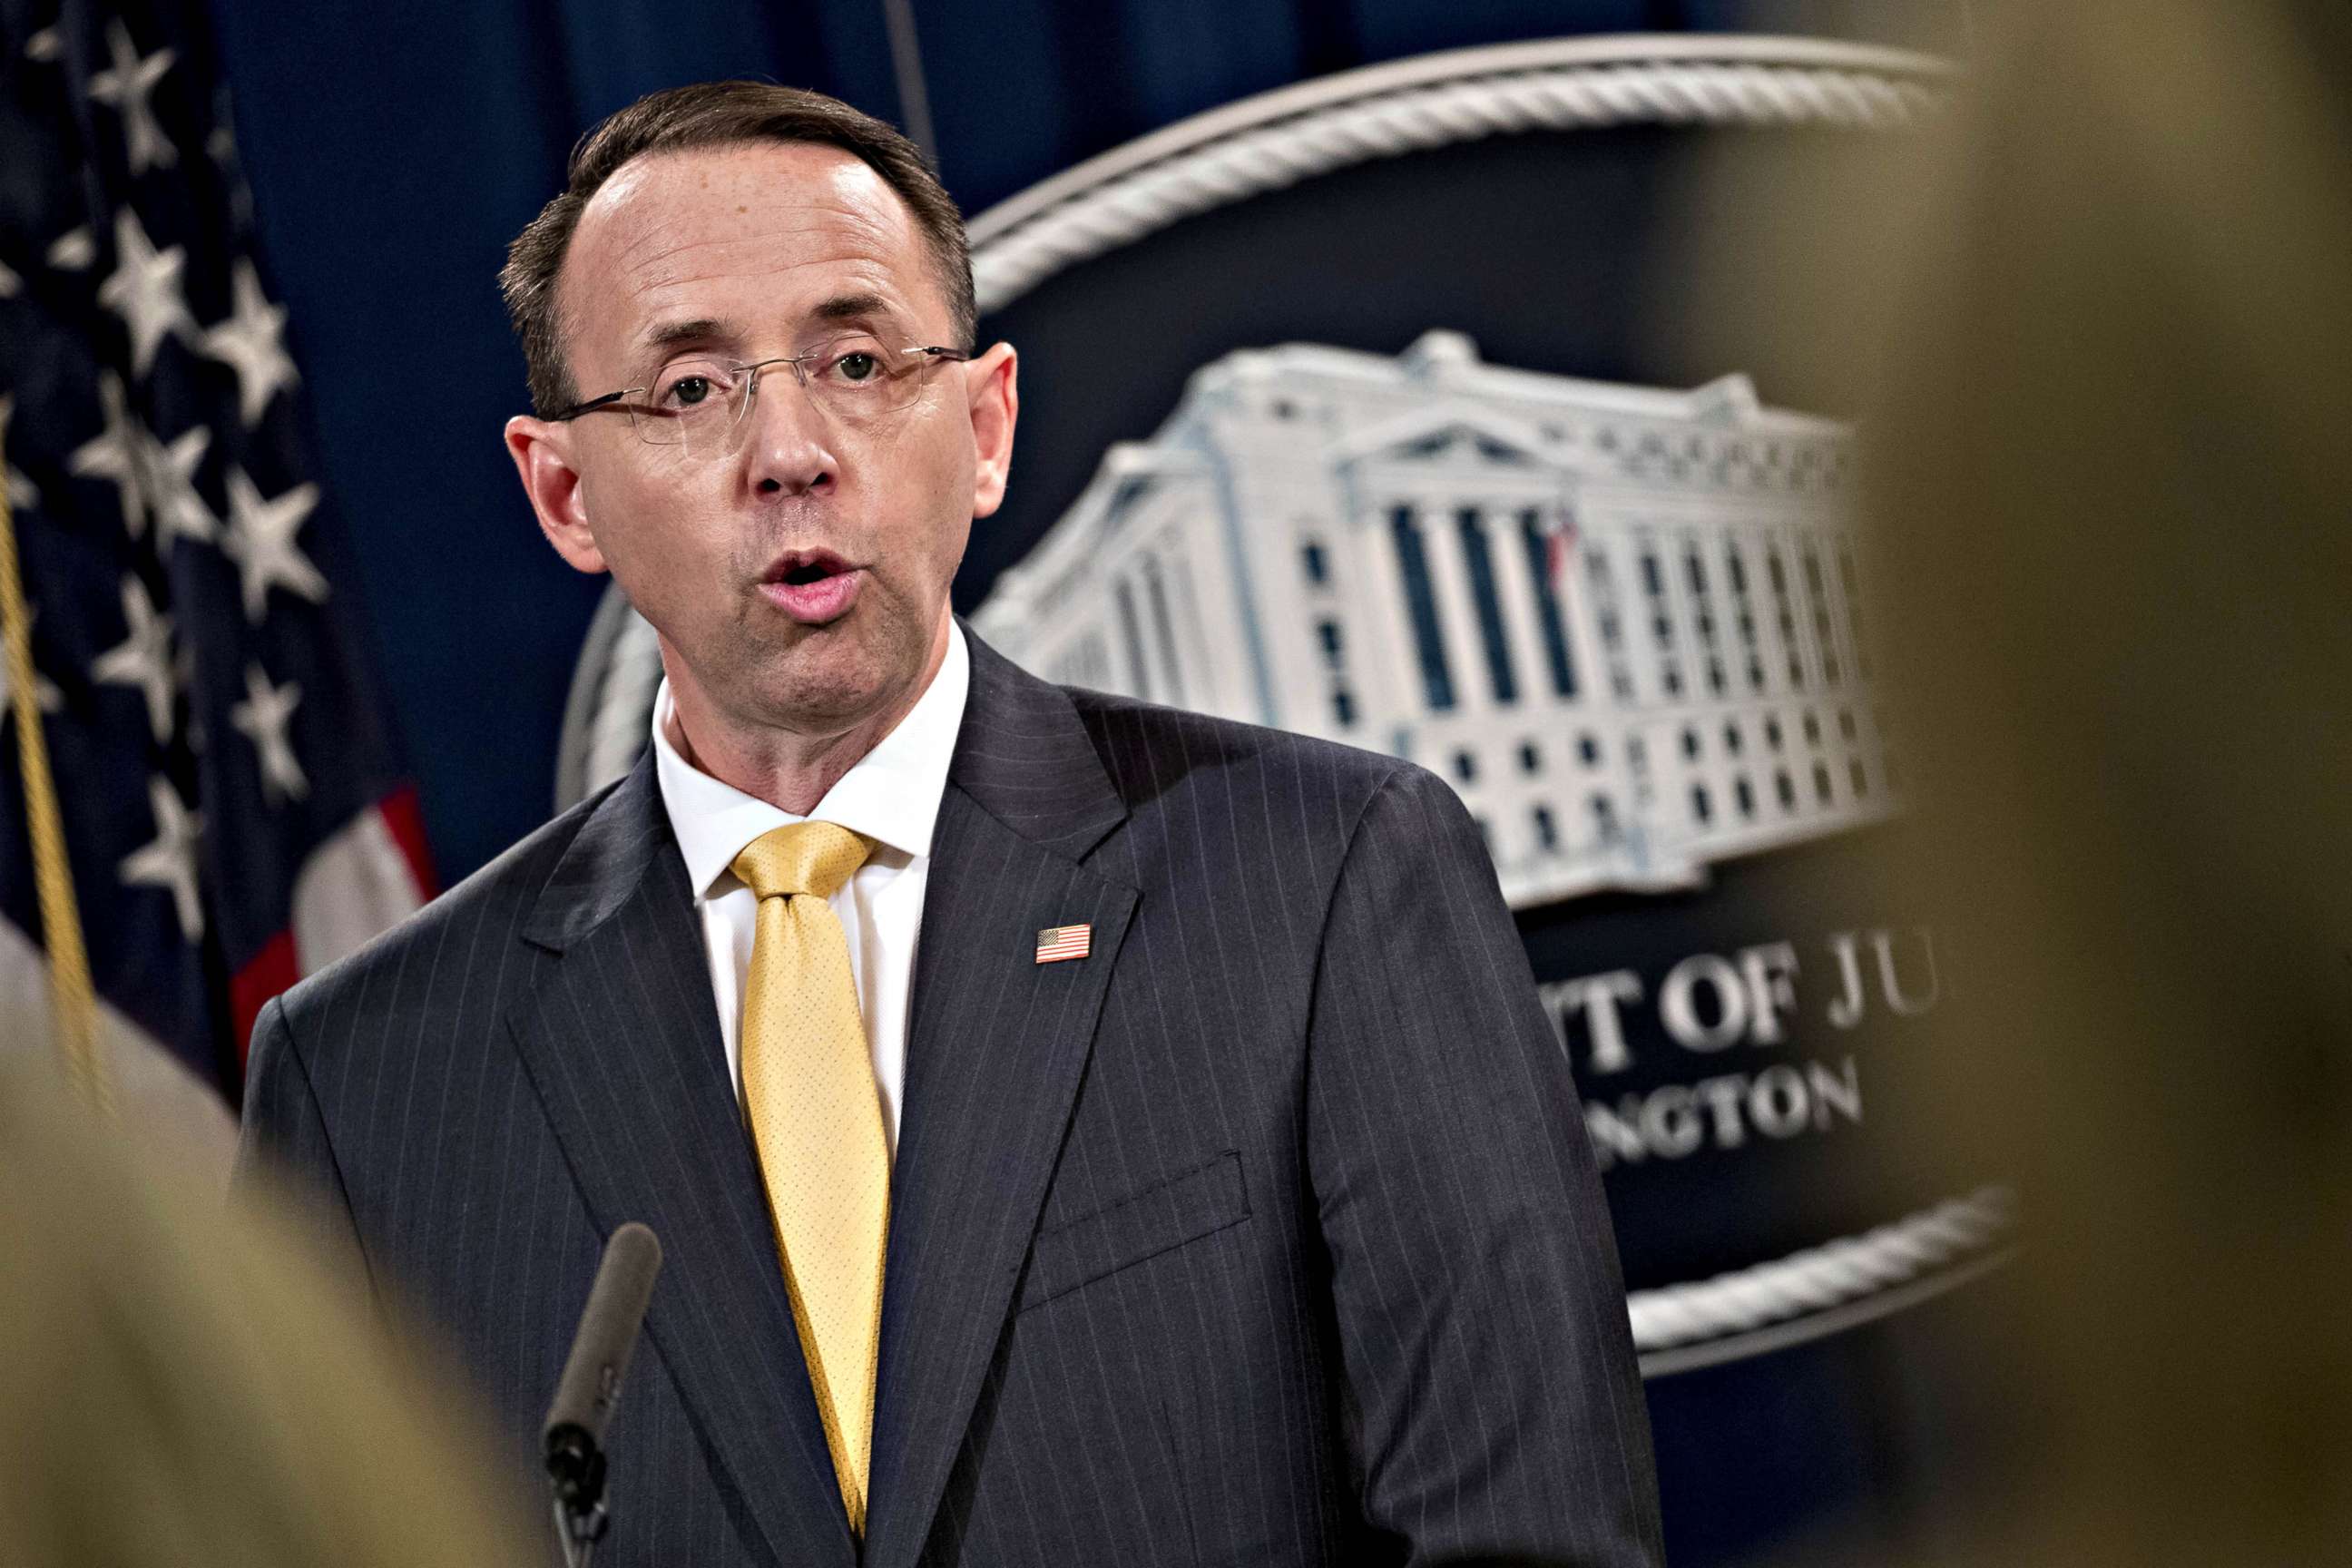 PHOTO: Rod Rosenstein, deputy attorney general, speaks during a news conference at the Department of Justice in Washington, Feb. 16, 2018.